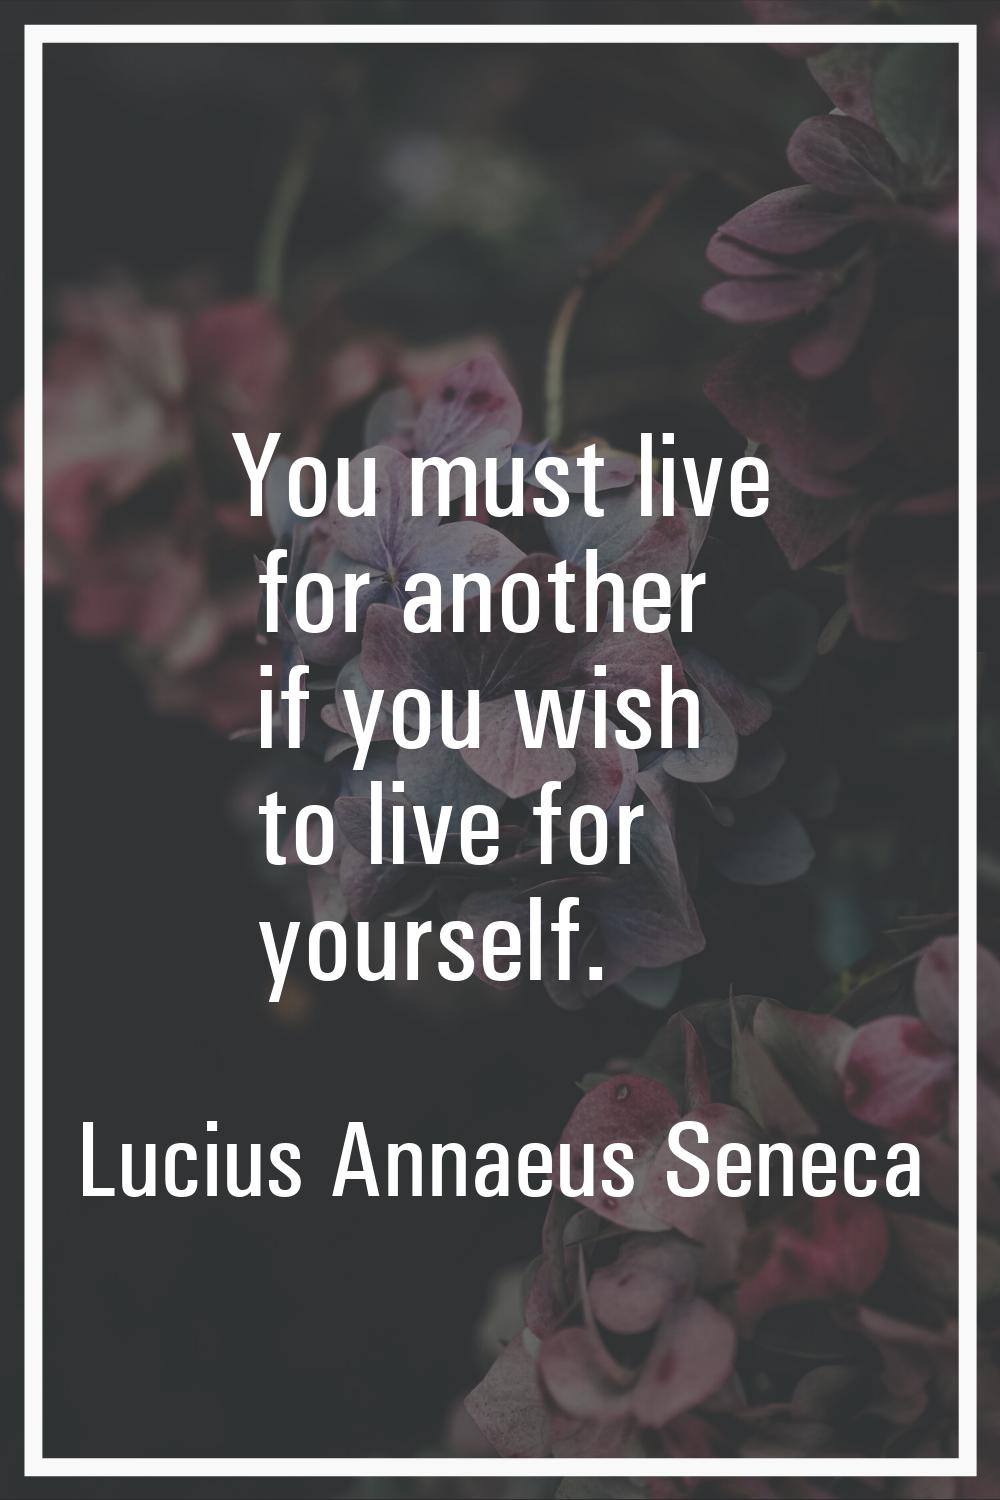 You must live for another if you wish to live for yourself.